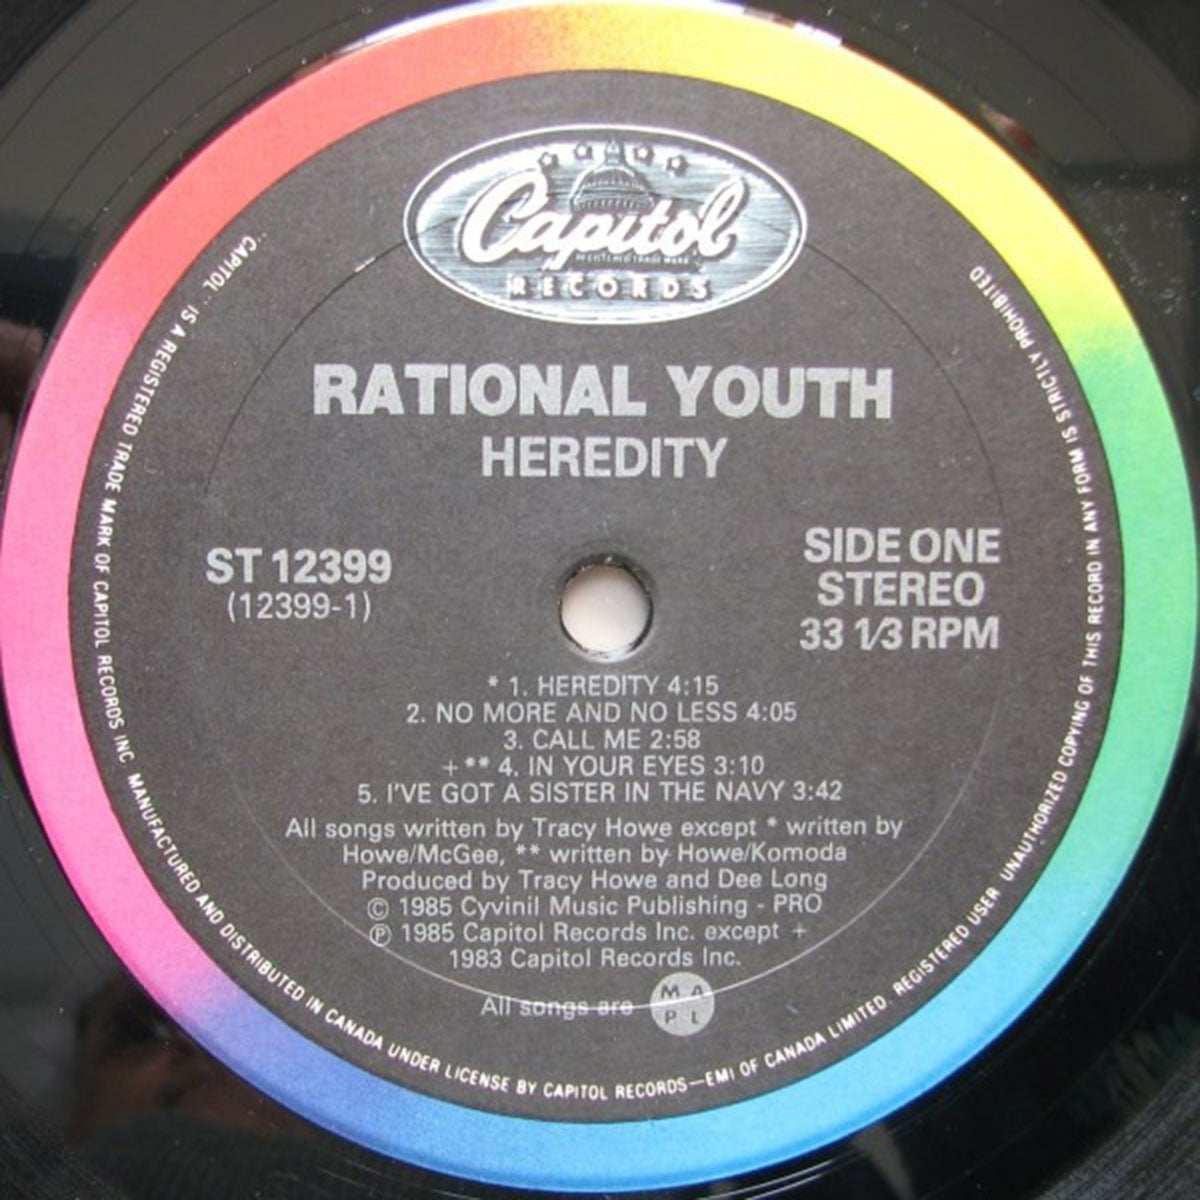 Rational Youth – Heredity